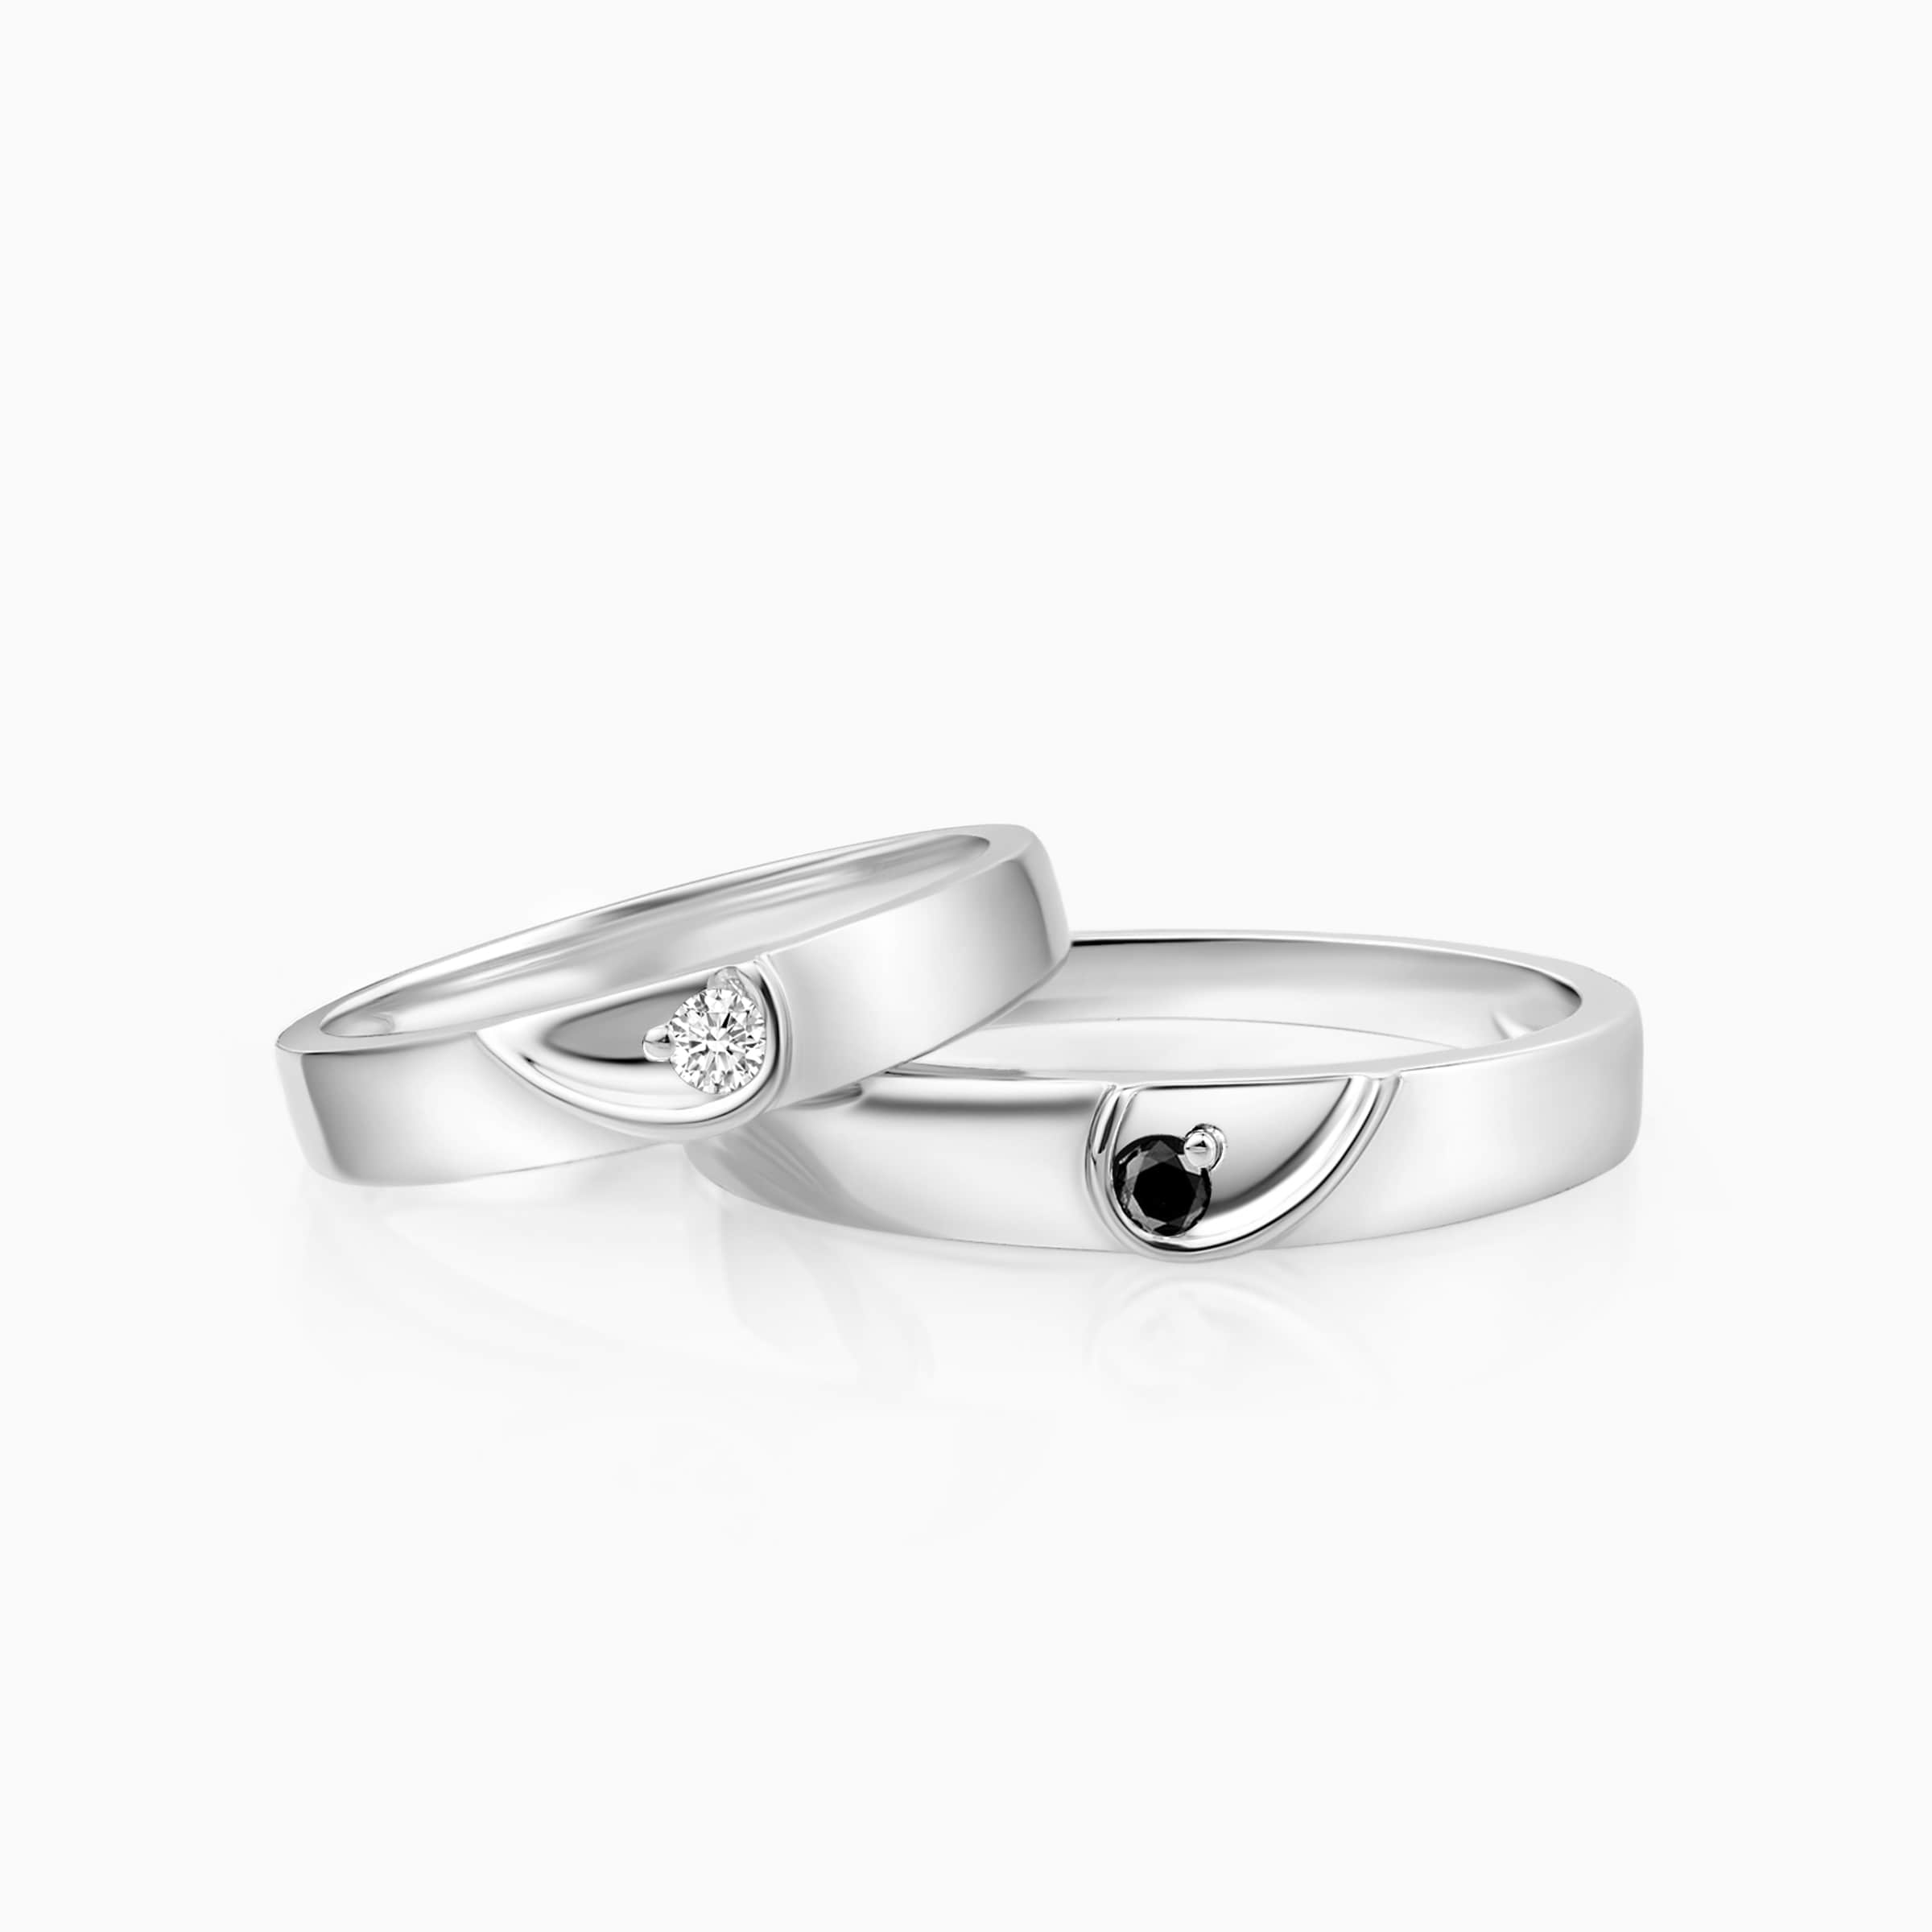 Darry Ring heart wedding rings for couple in white gold